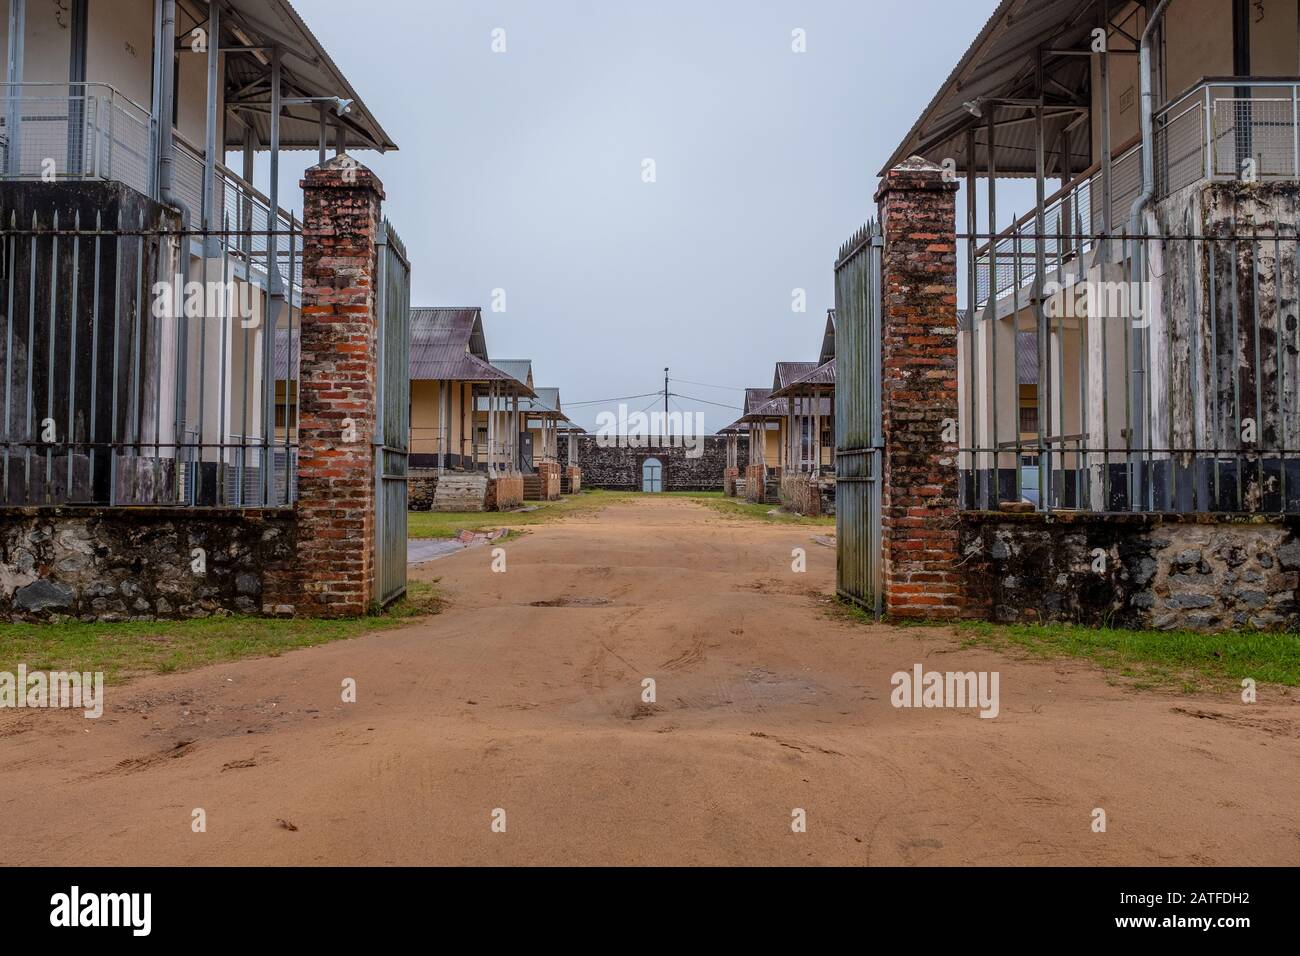 Central perspective on the entrance of the prison of St-Laurent-du-Maroni, taken on an overcast day with no people, French Guiana. Stock Photo